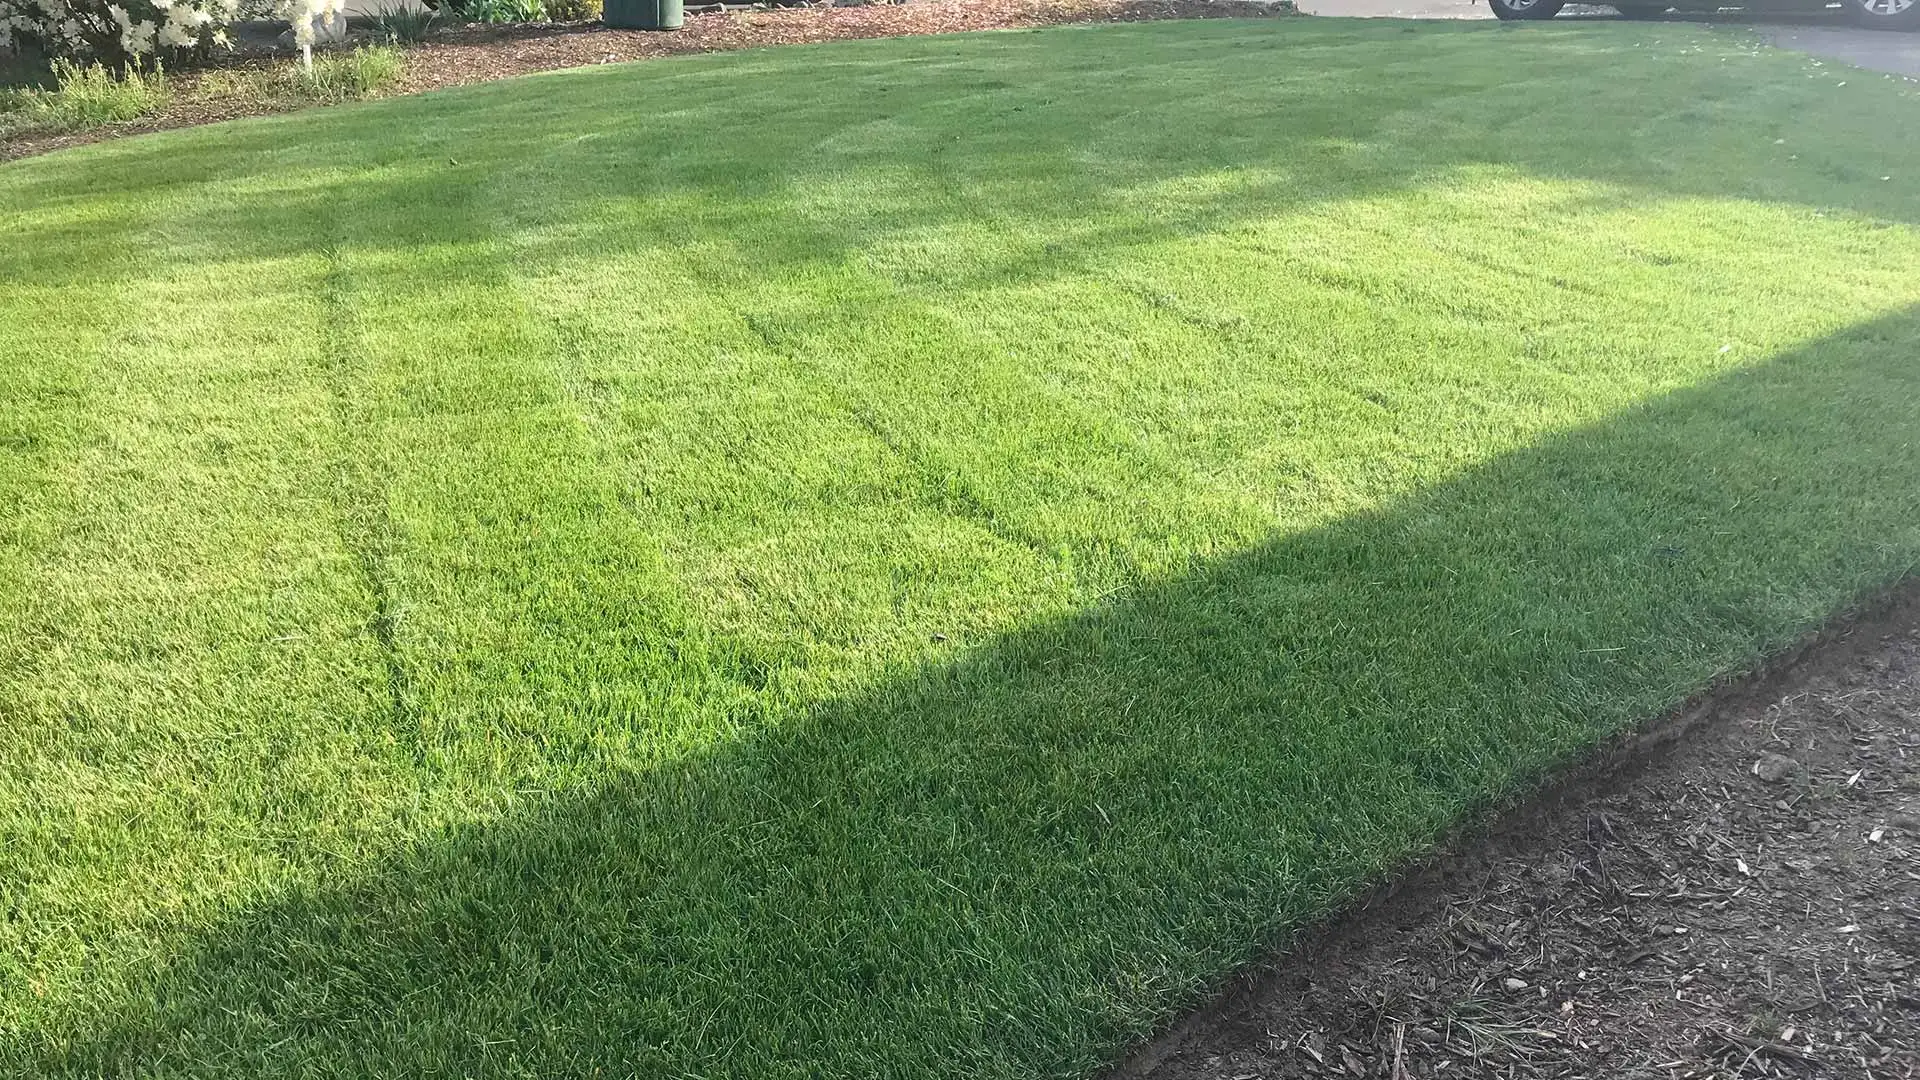 A recently mowed and fertilized lawn in Troutdale, OR.